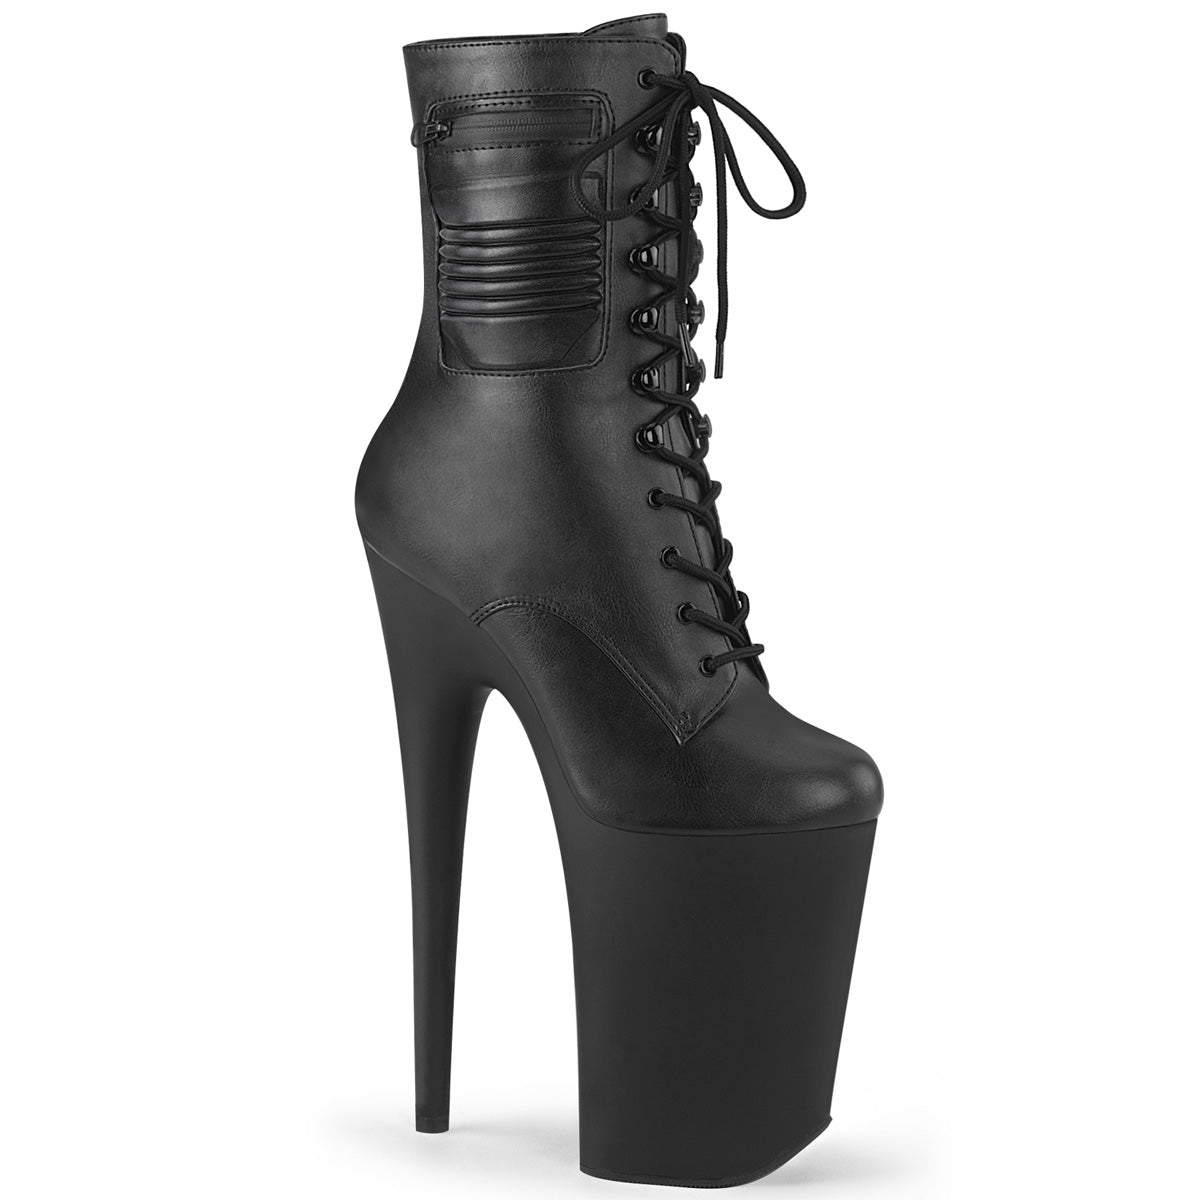 INFINITY-1020PK Black Faux Leather Ankle Boot Pleaser